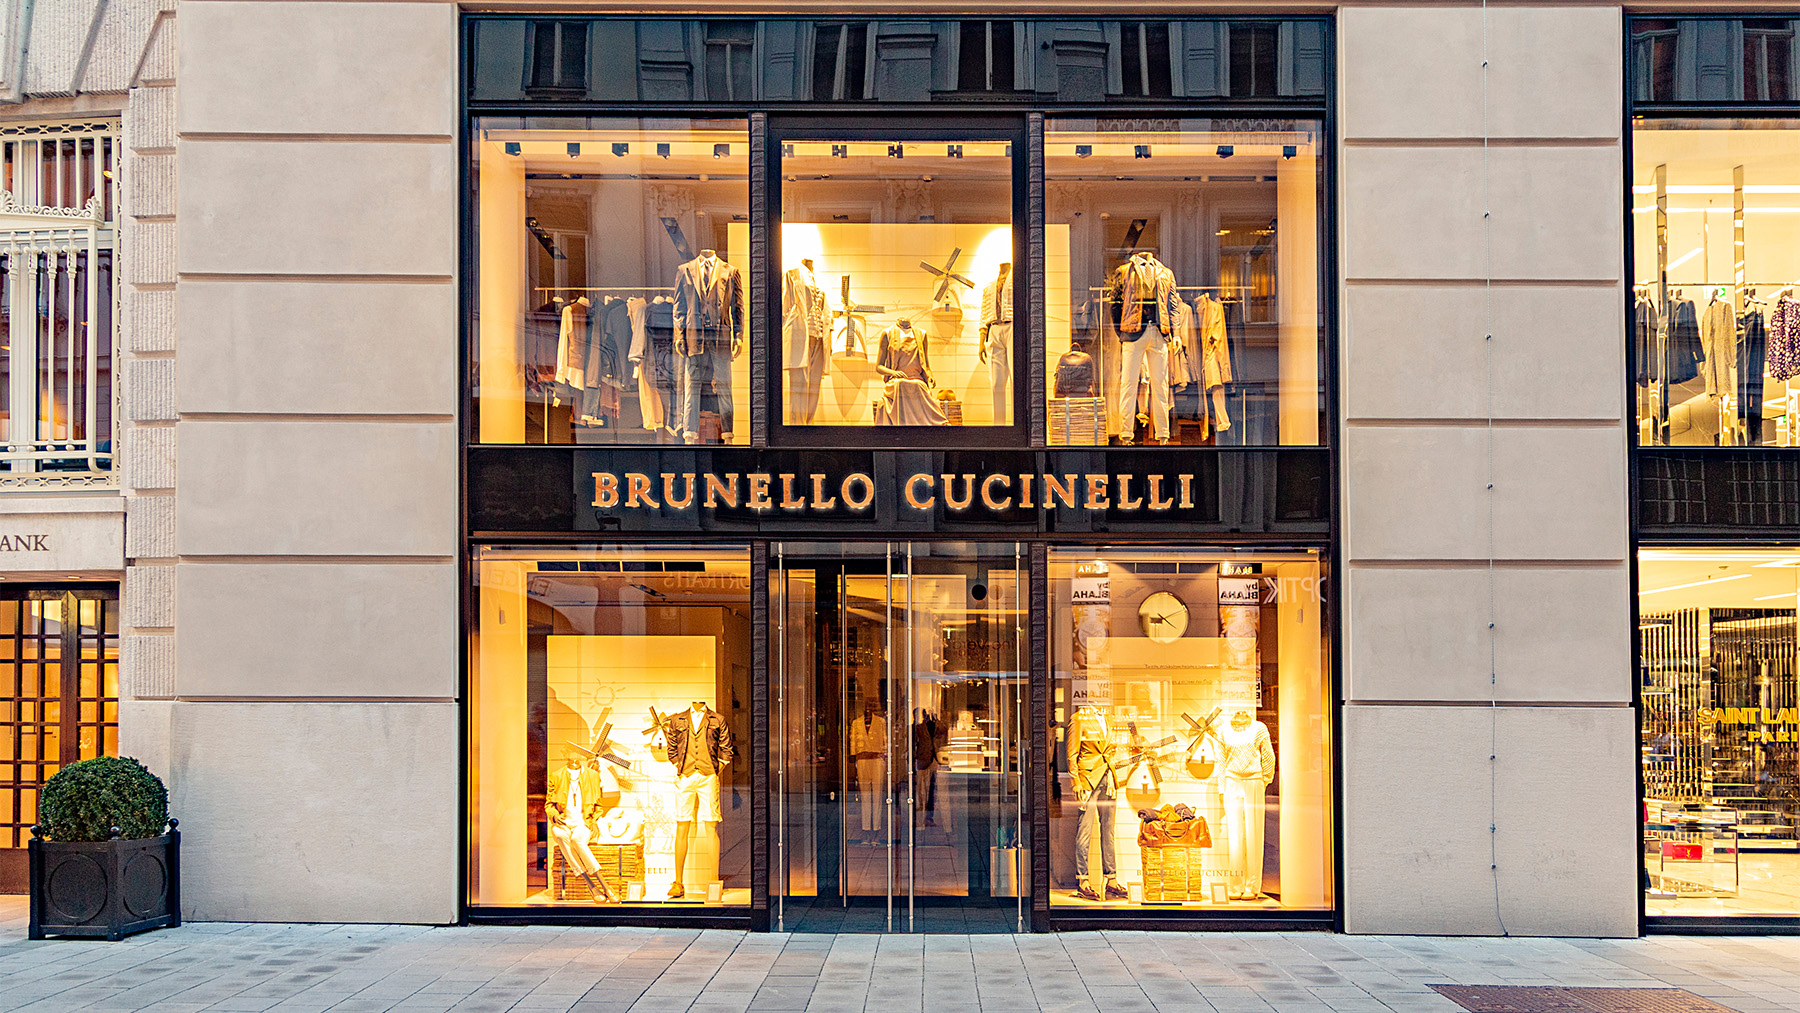 Brunello Cucinelli says 2021 growth spurt “not rational”